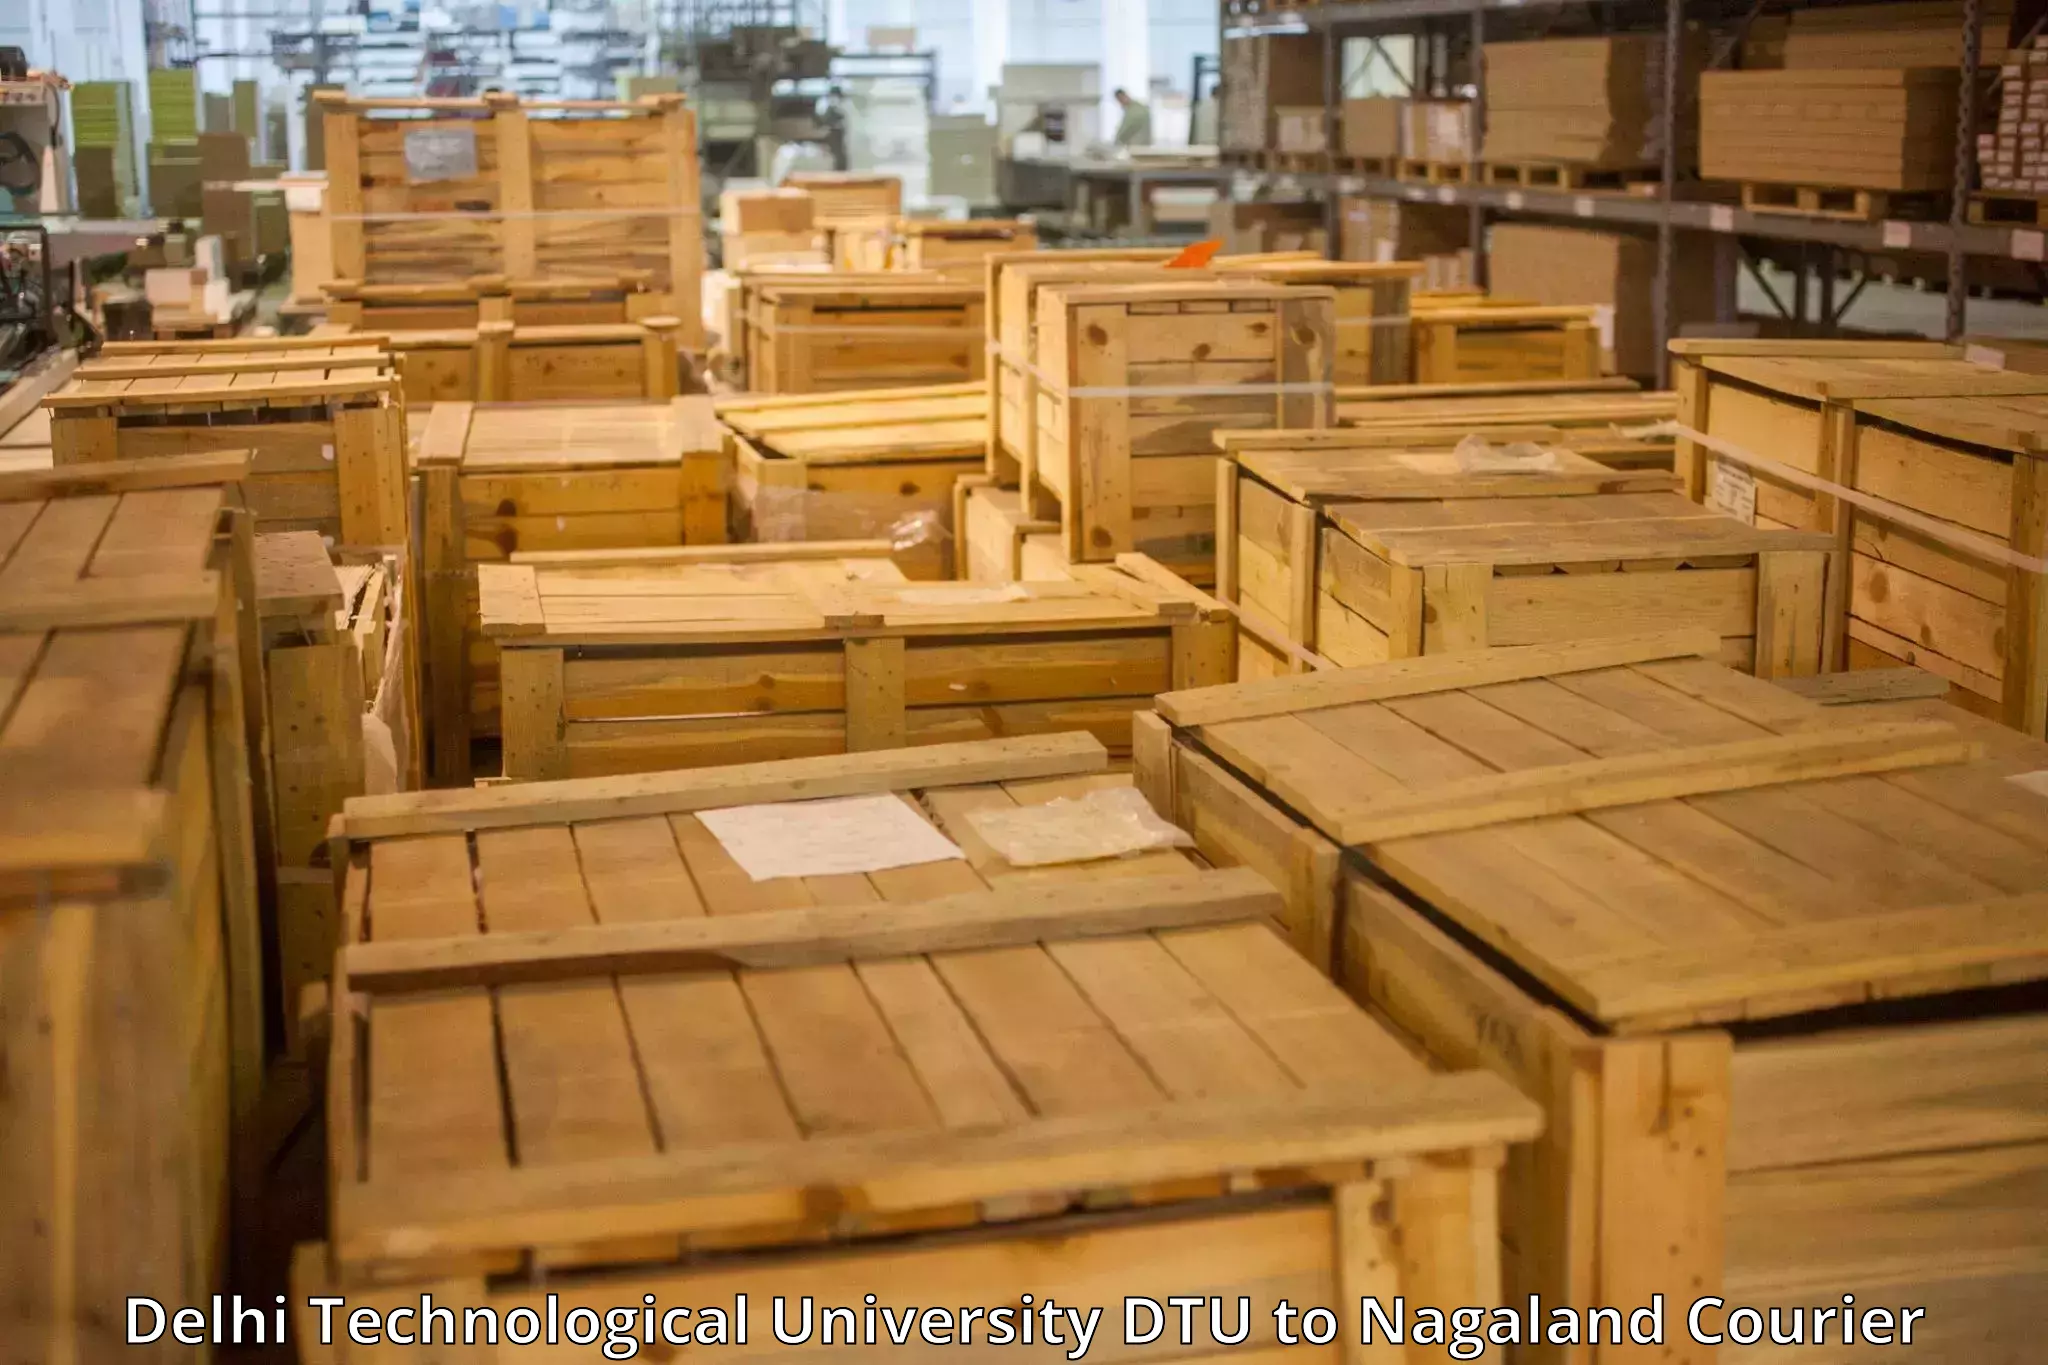 Baggage shipping experience Delhi Technological University DTU to Dimapur